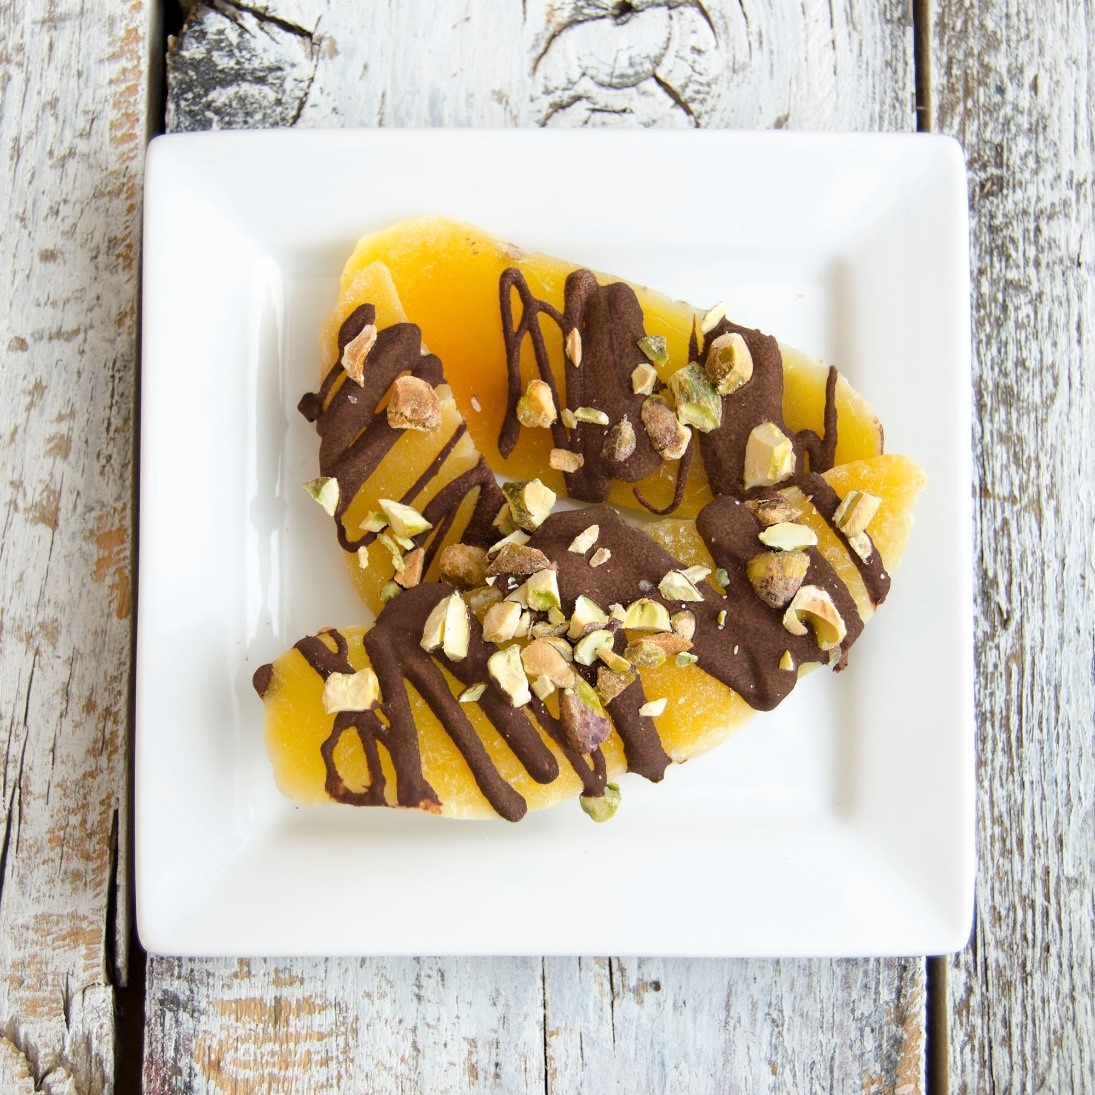 Completed chocolate and pistachios drizzled mangos displayed on a plate